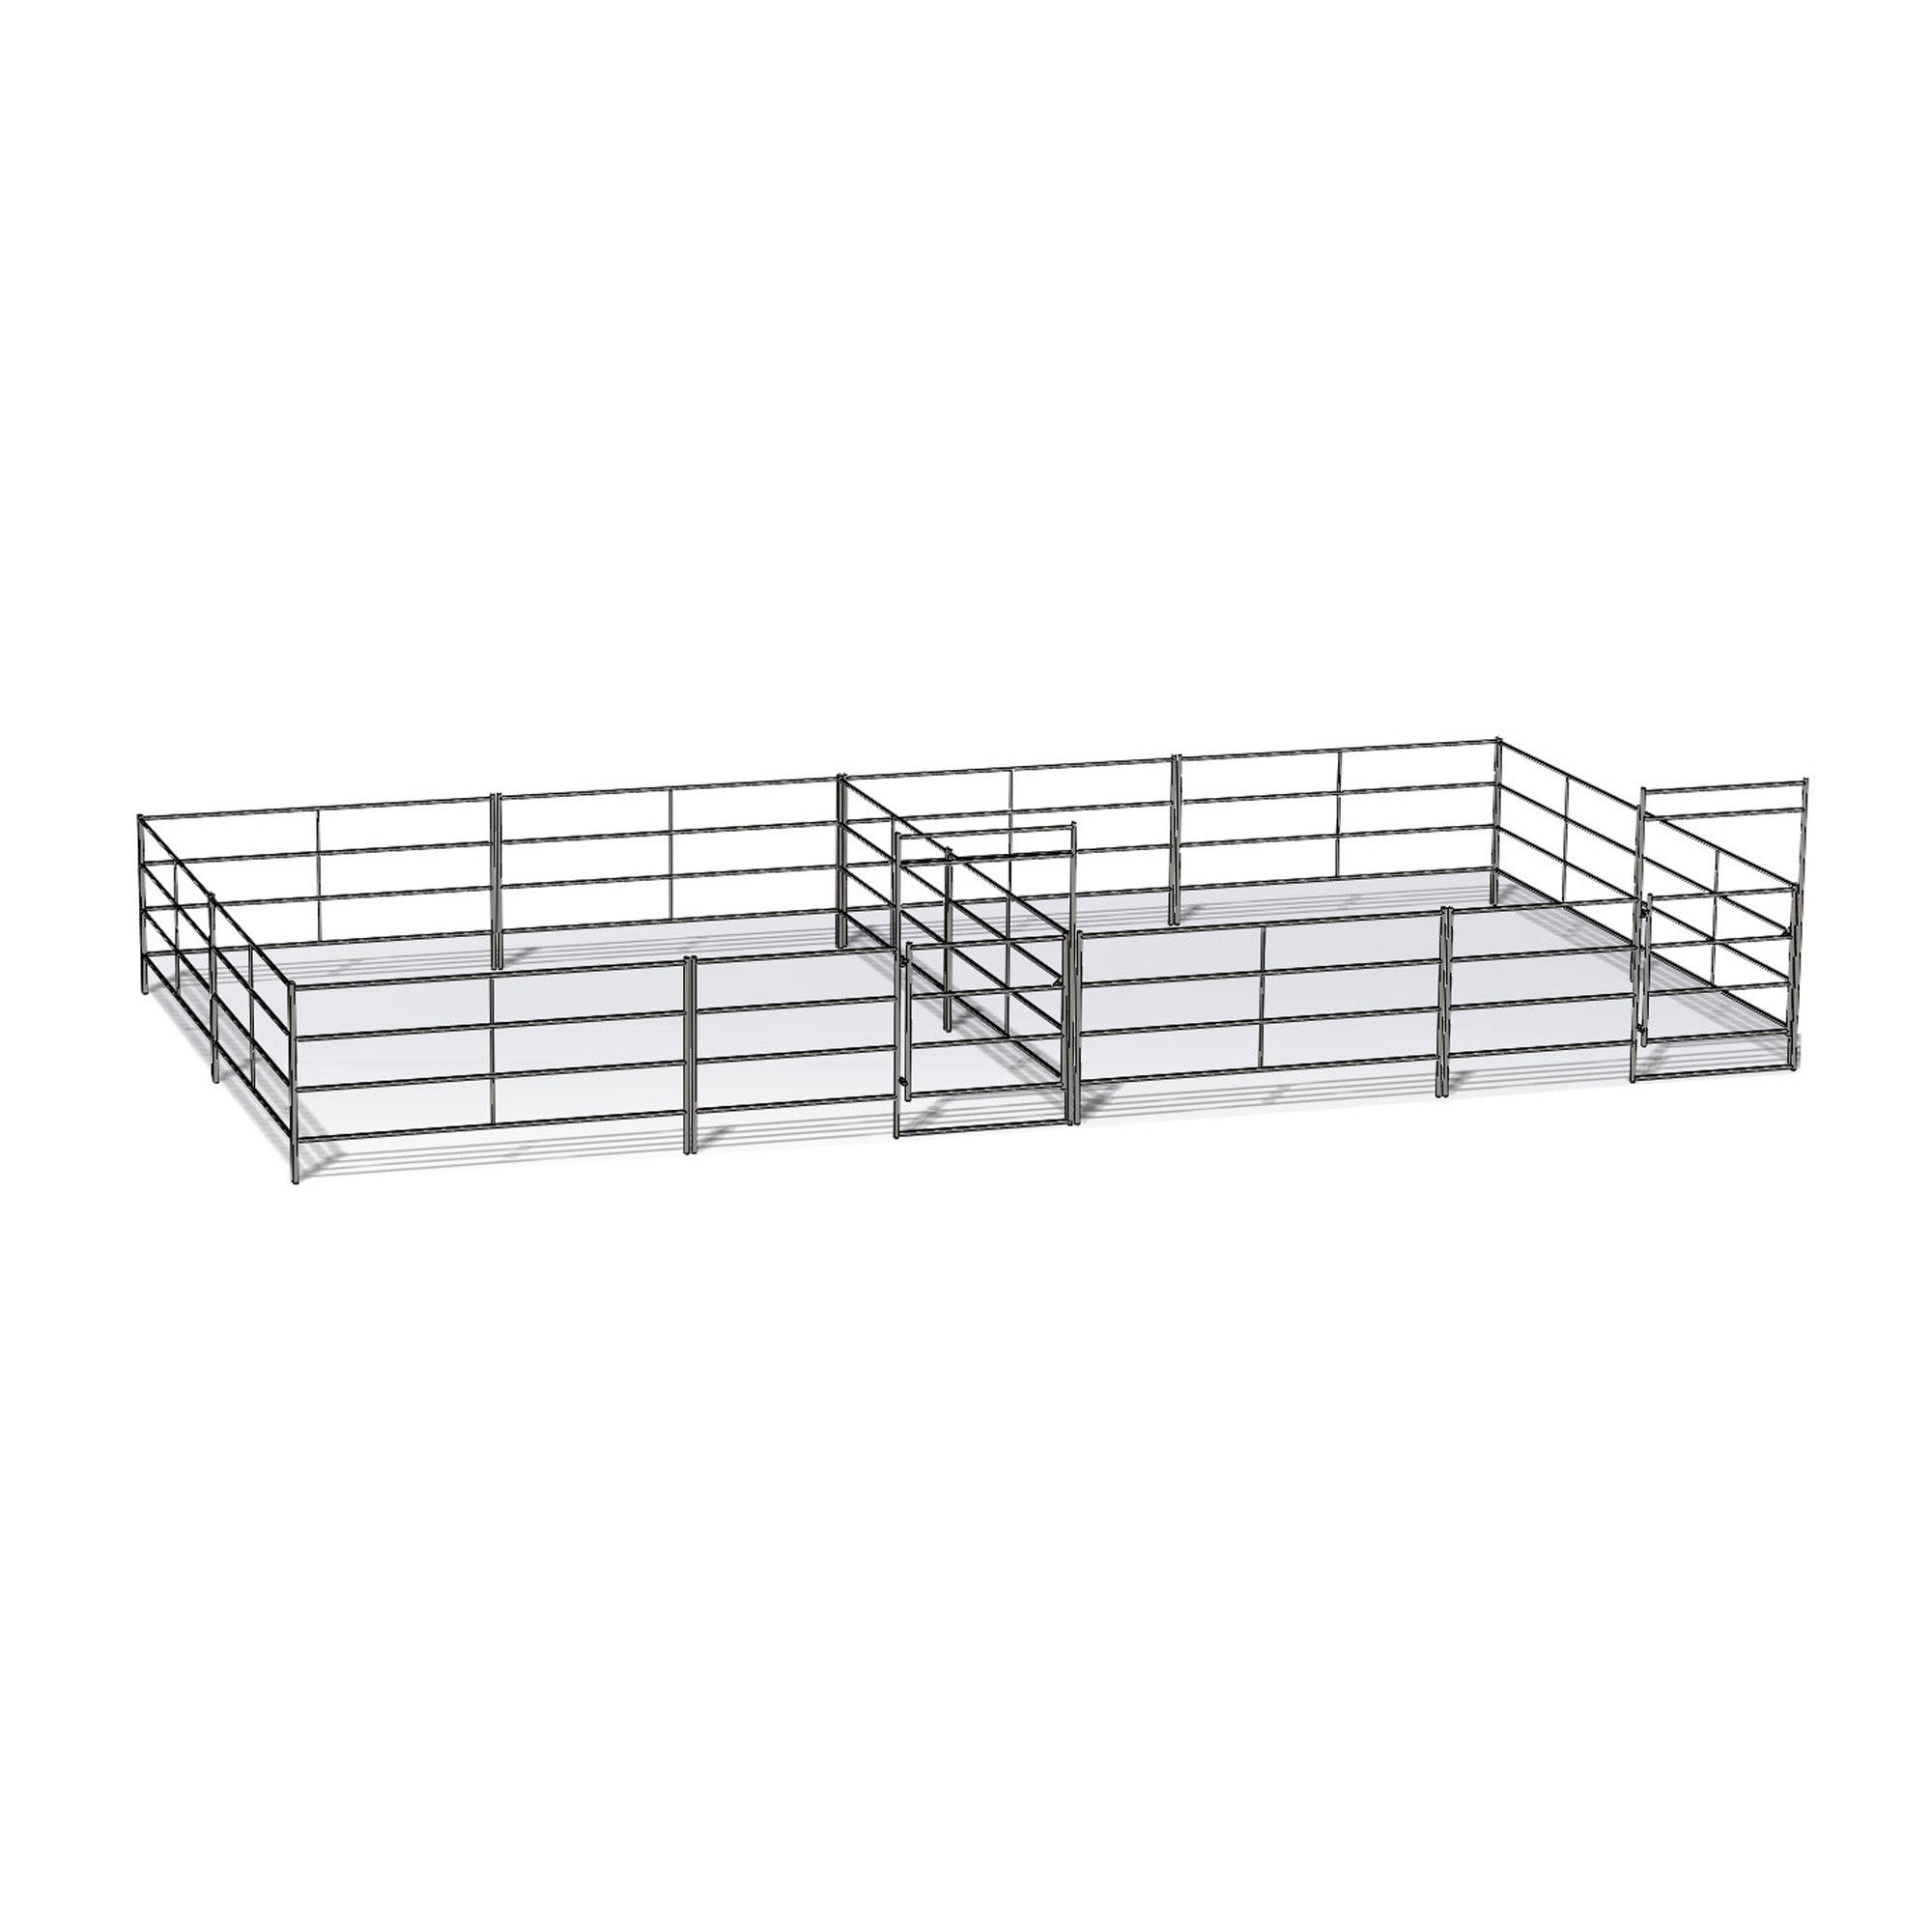 Two 20 Ft X 20 Ft Side by Side Stall Kit (5 Rail)